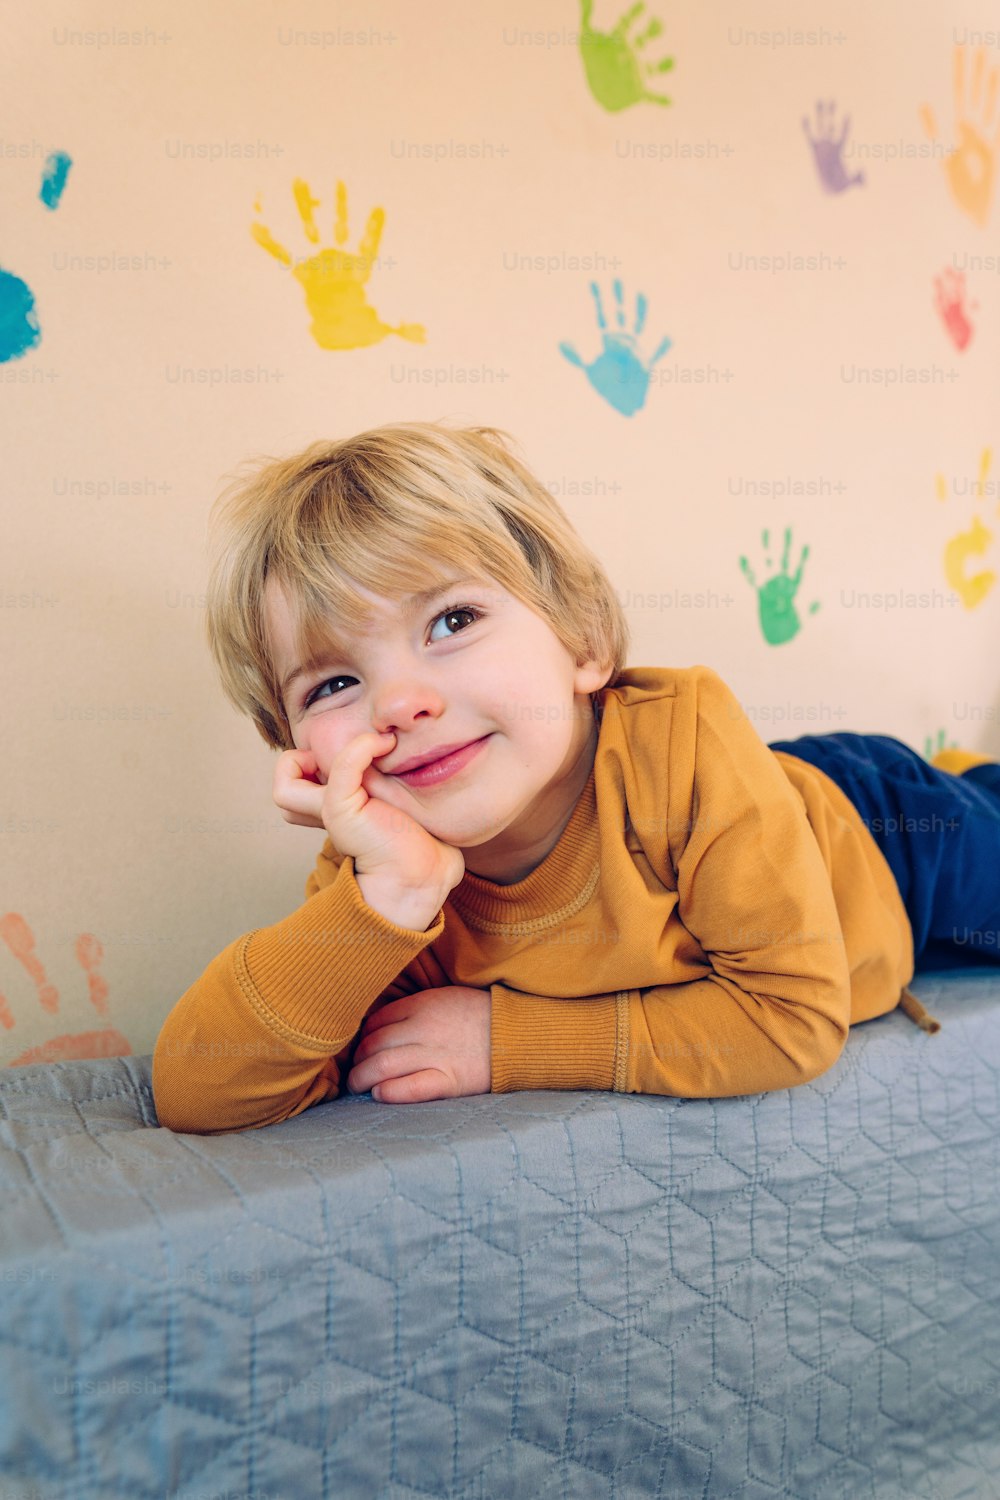 Funny 3 years old boy lying on the sofa in the kids room photo – Indoors  Image on Unsplash